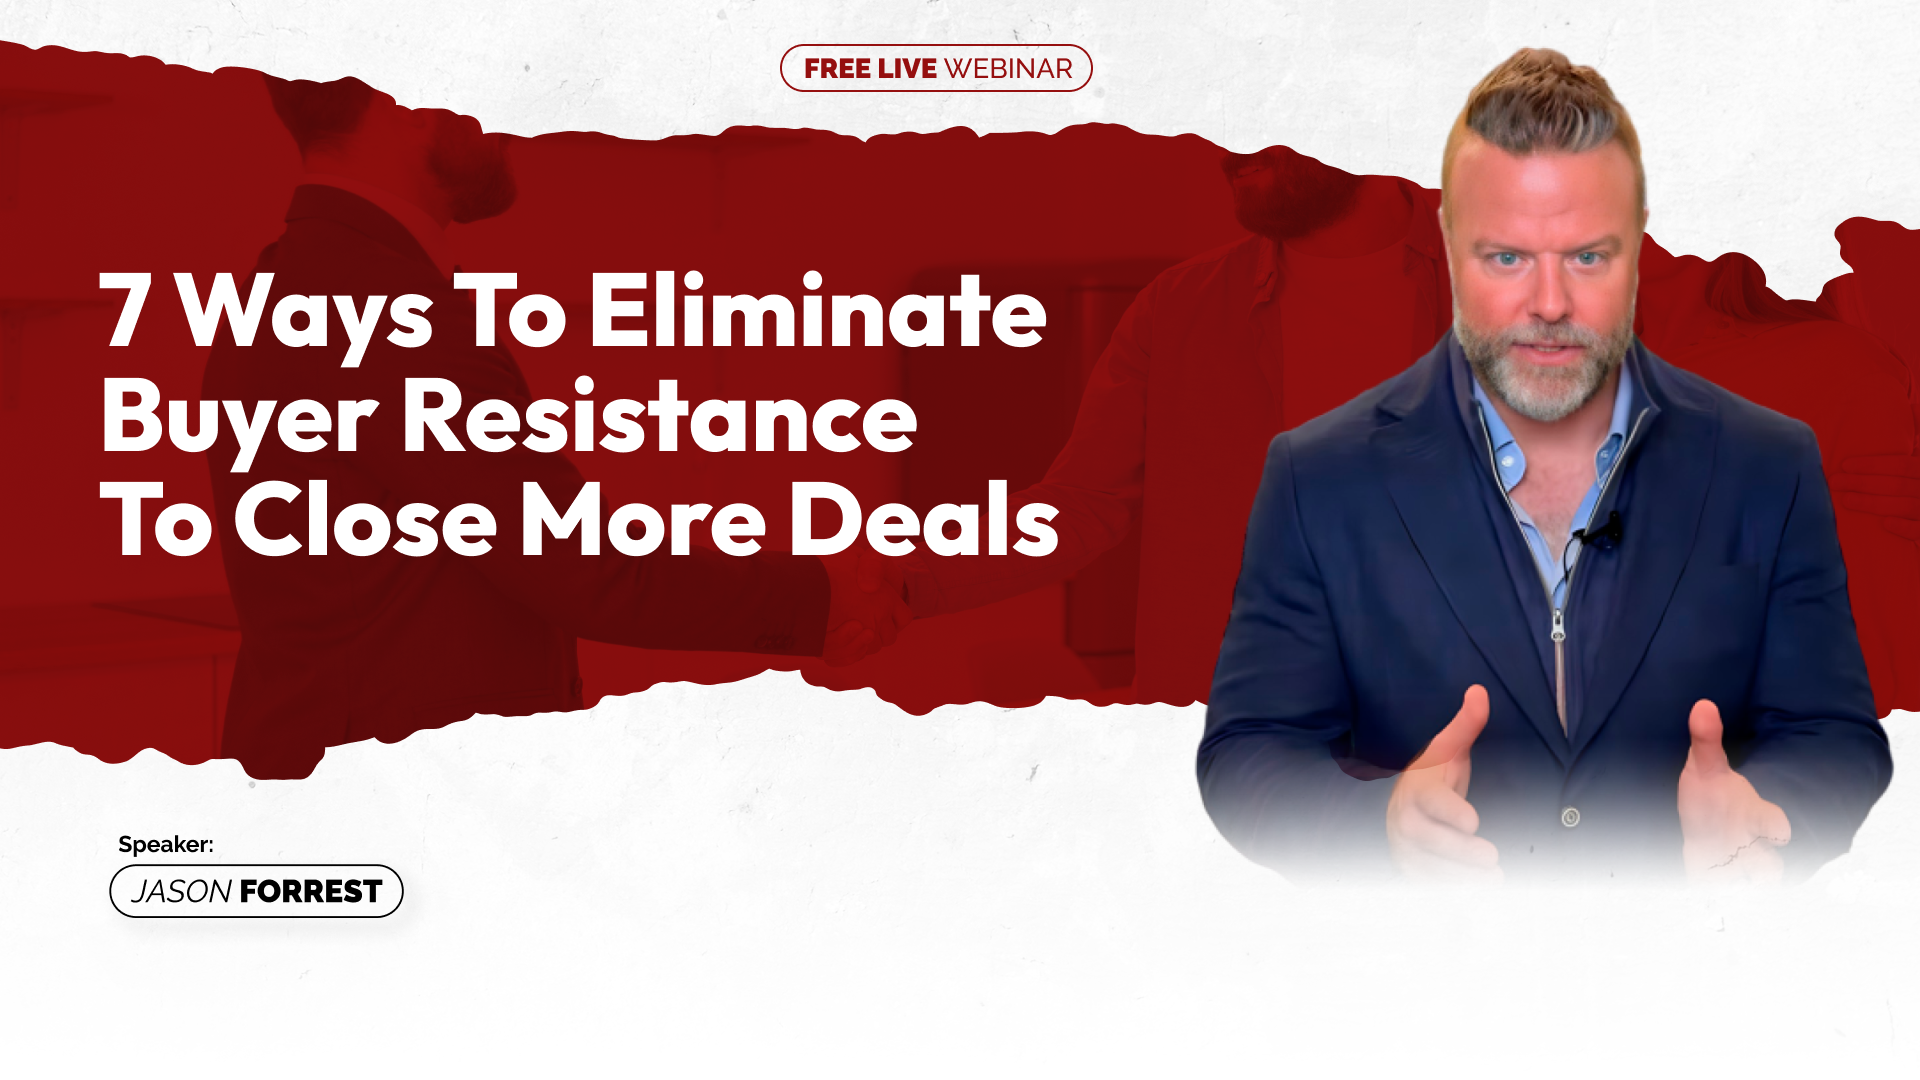 7 Ways to Eliminate Buyer Resistance to Close More Deals